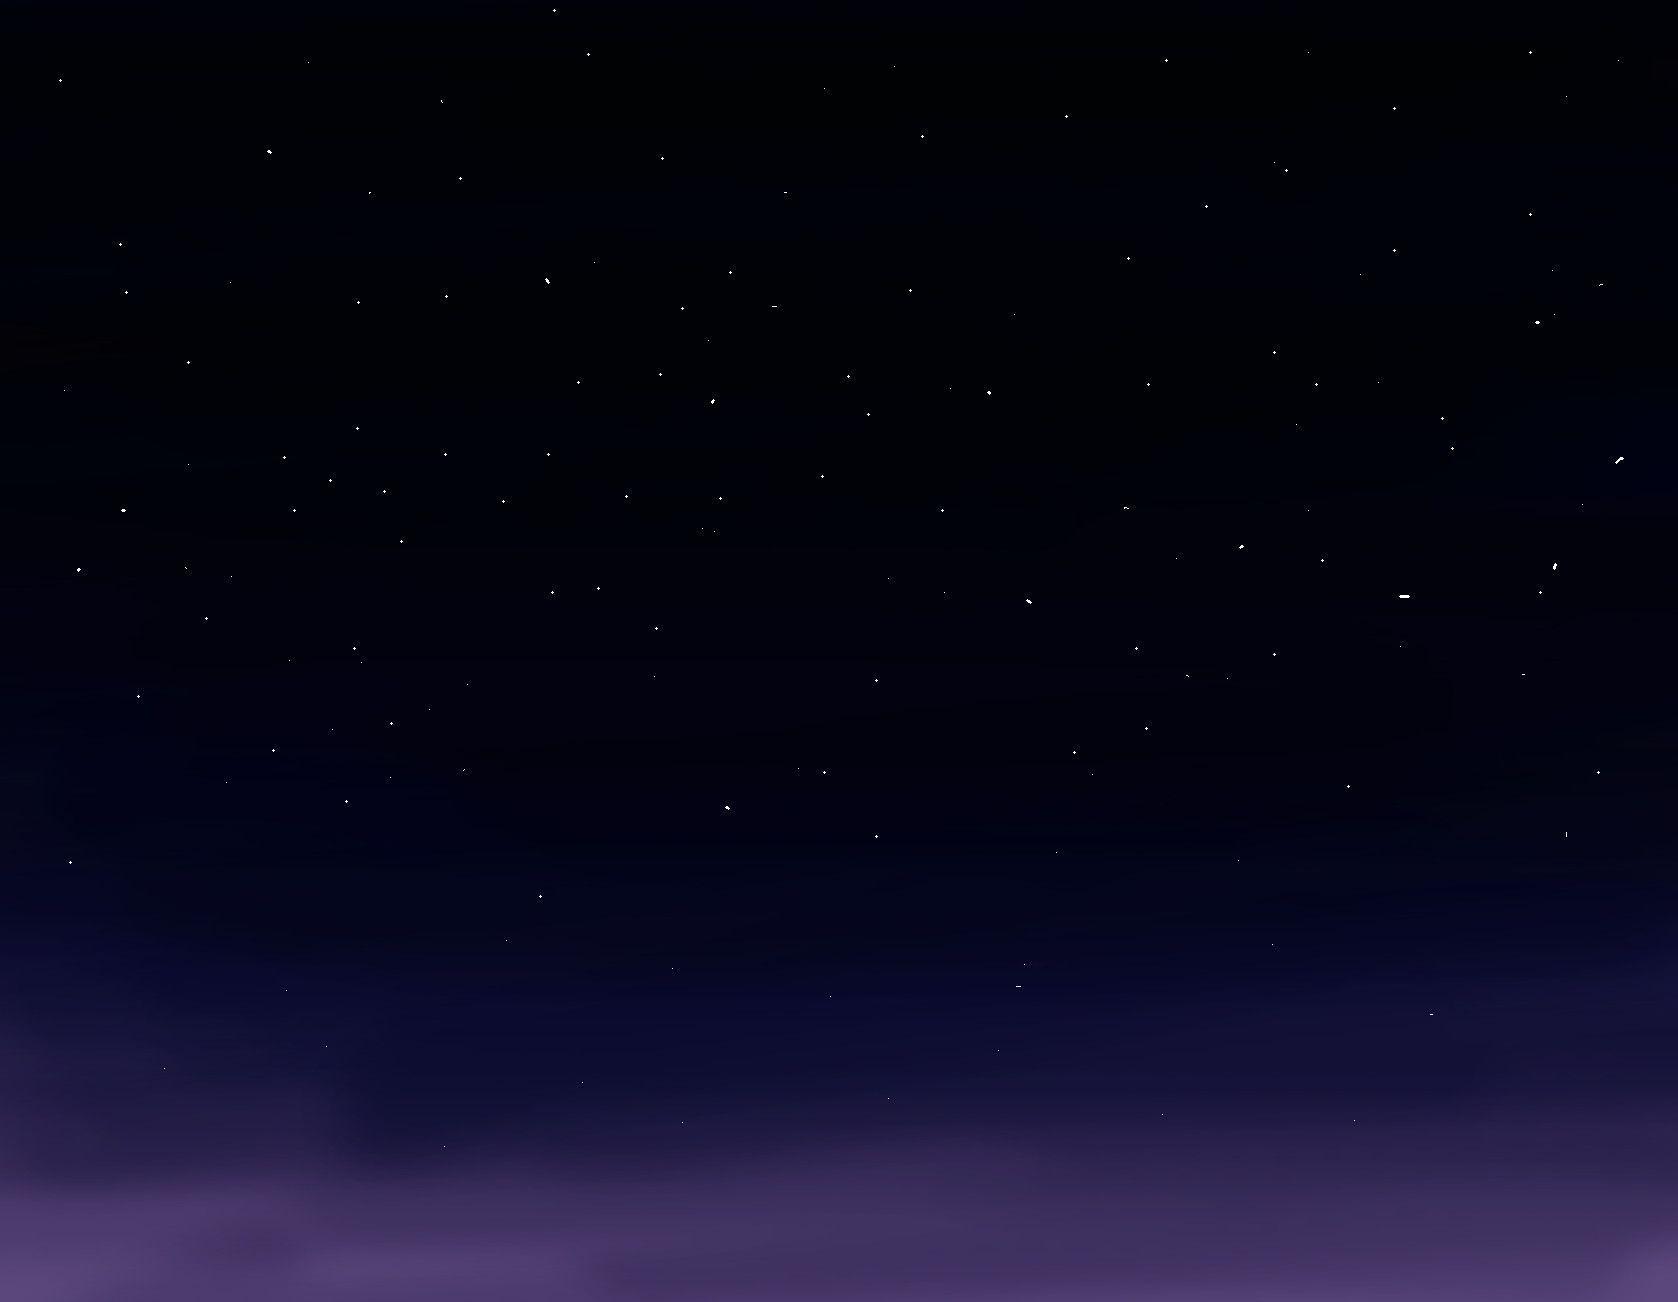 Starry Sky Background For Tumblr Image & Picture